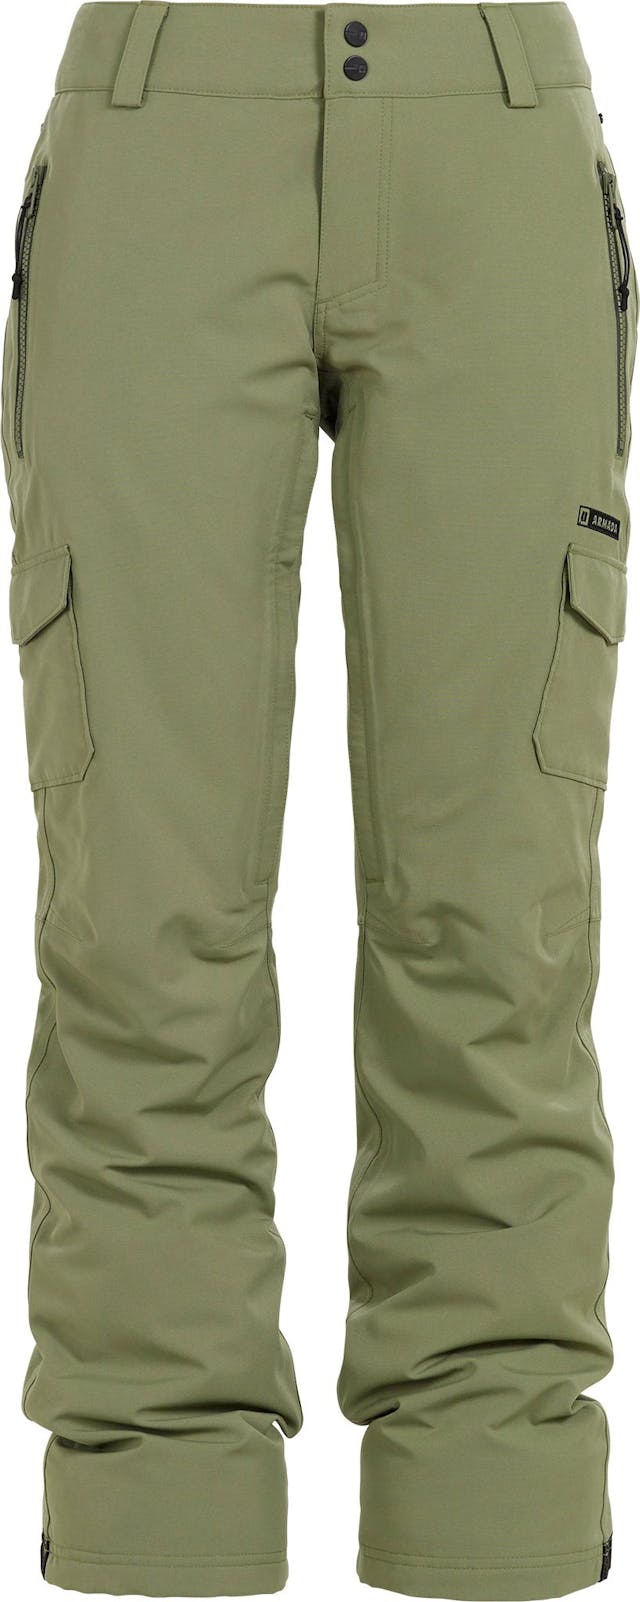 Product image for Mula Insulated Pant - Women's